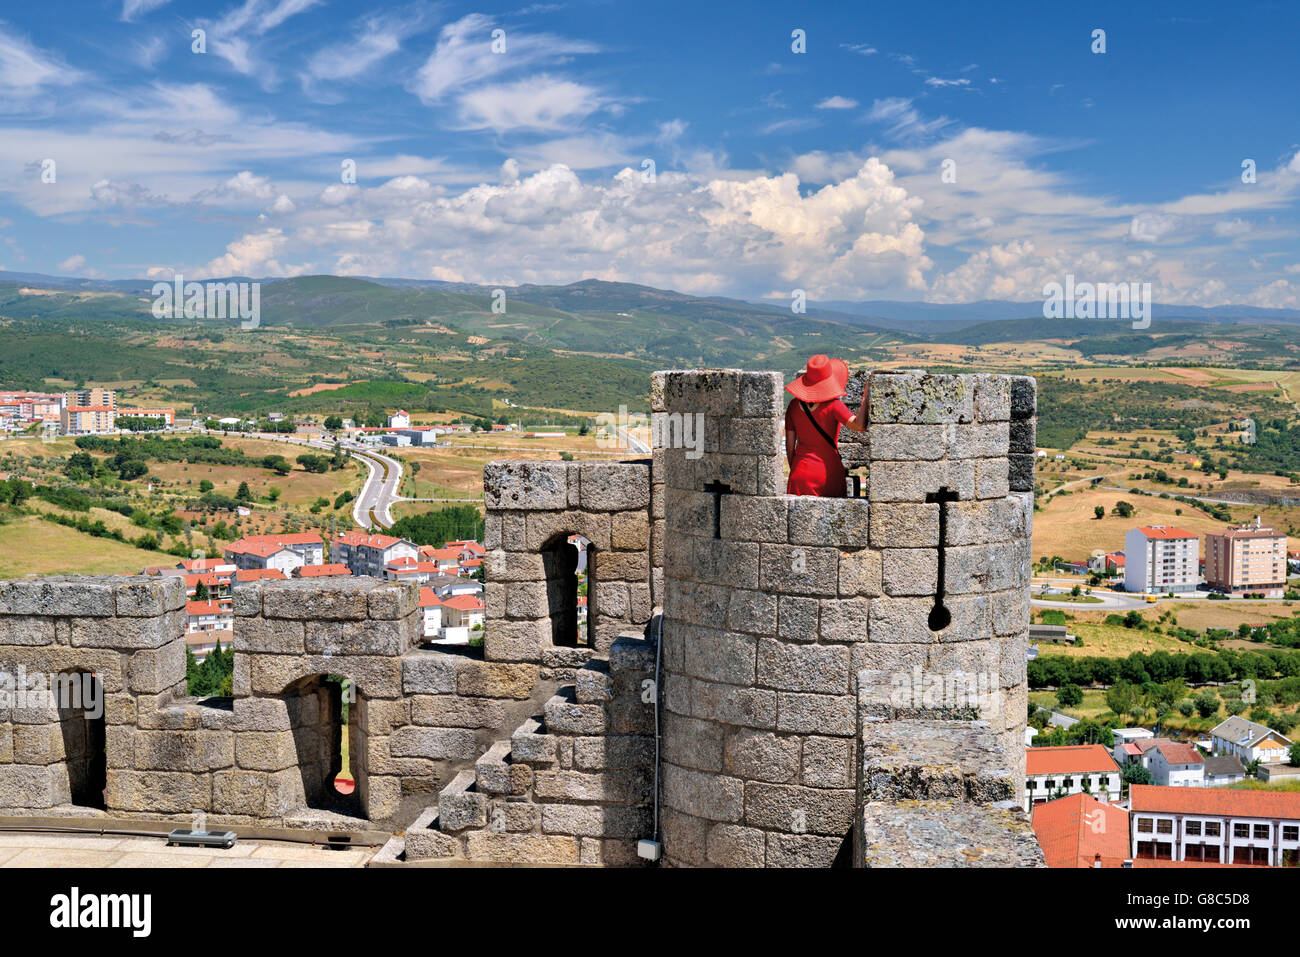 Portugal, Tras-os-Montes: Women with red hat and red dress on a view tower of the medieval castle of Braganca Stock Photo